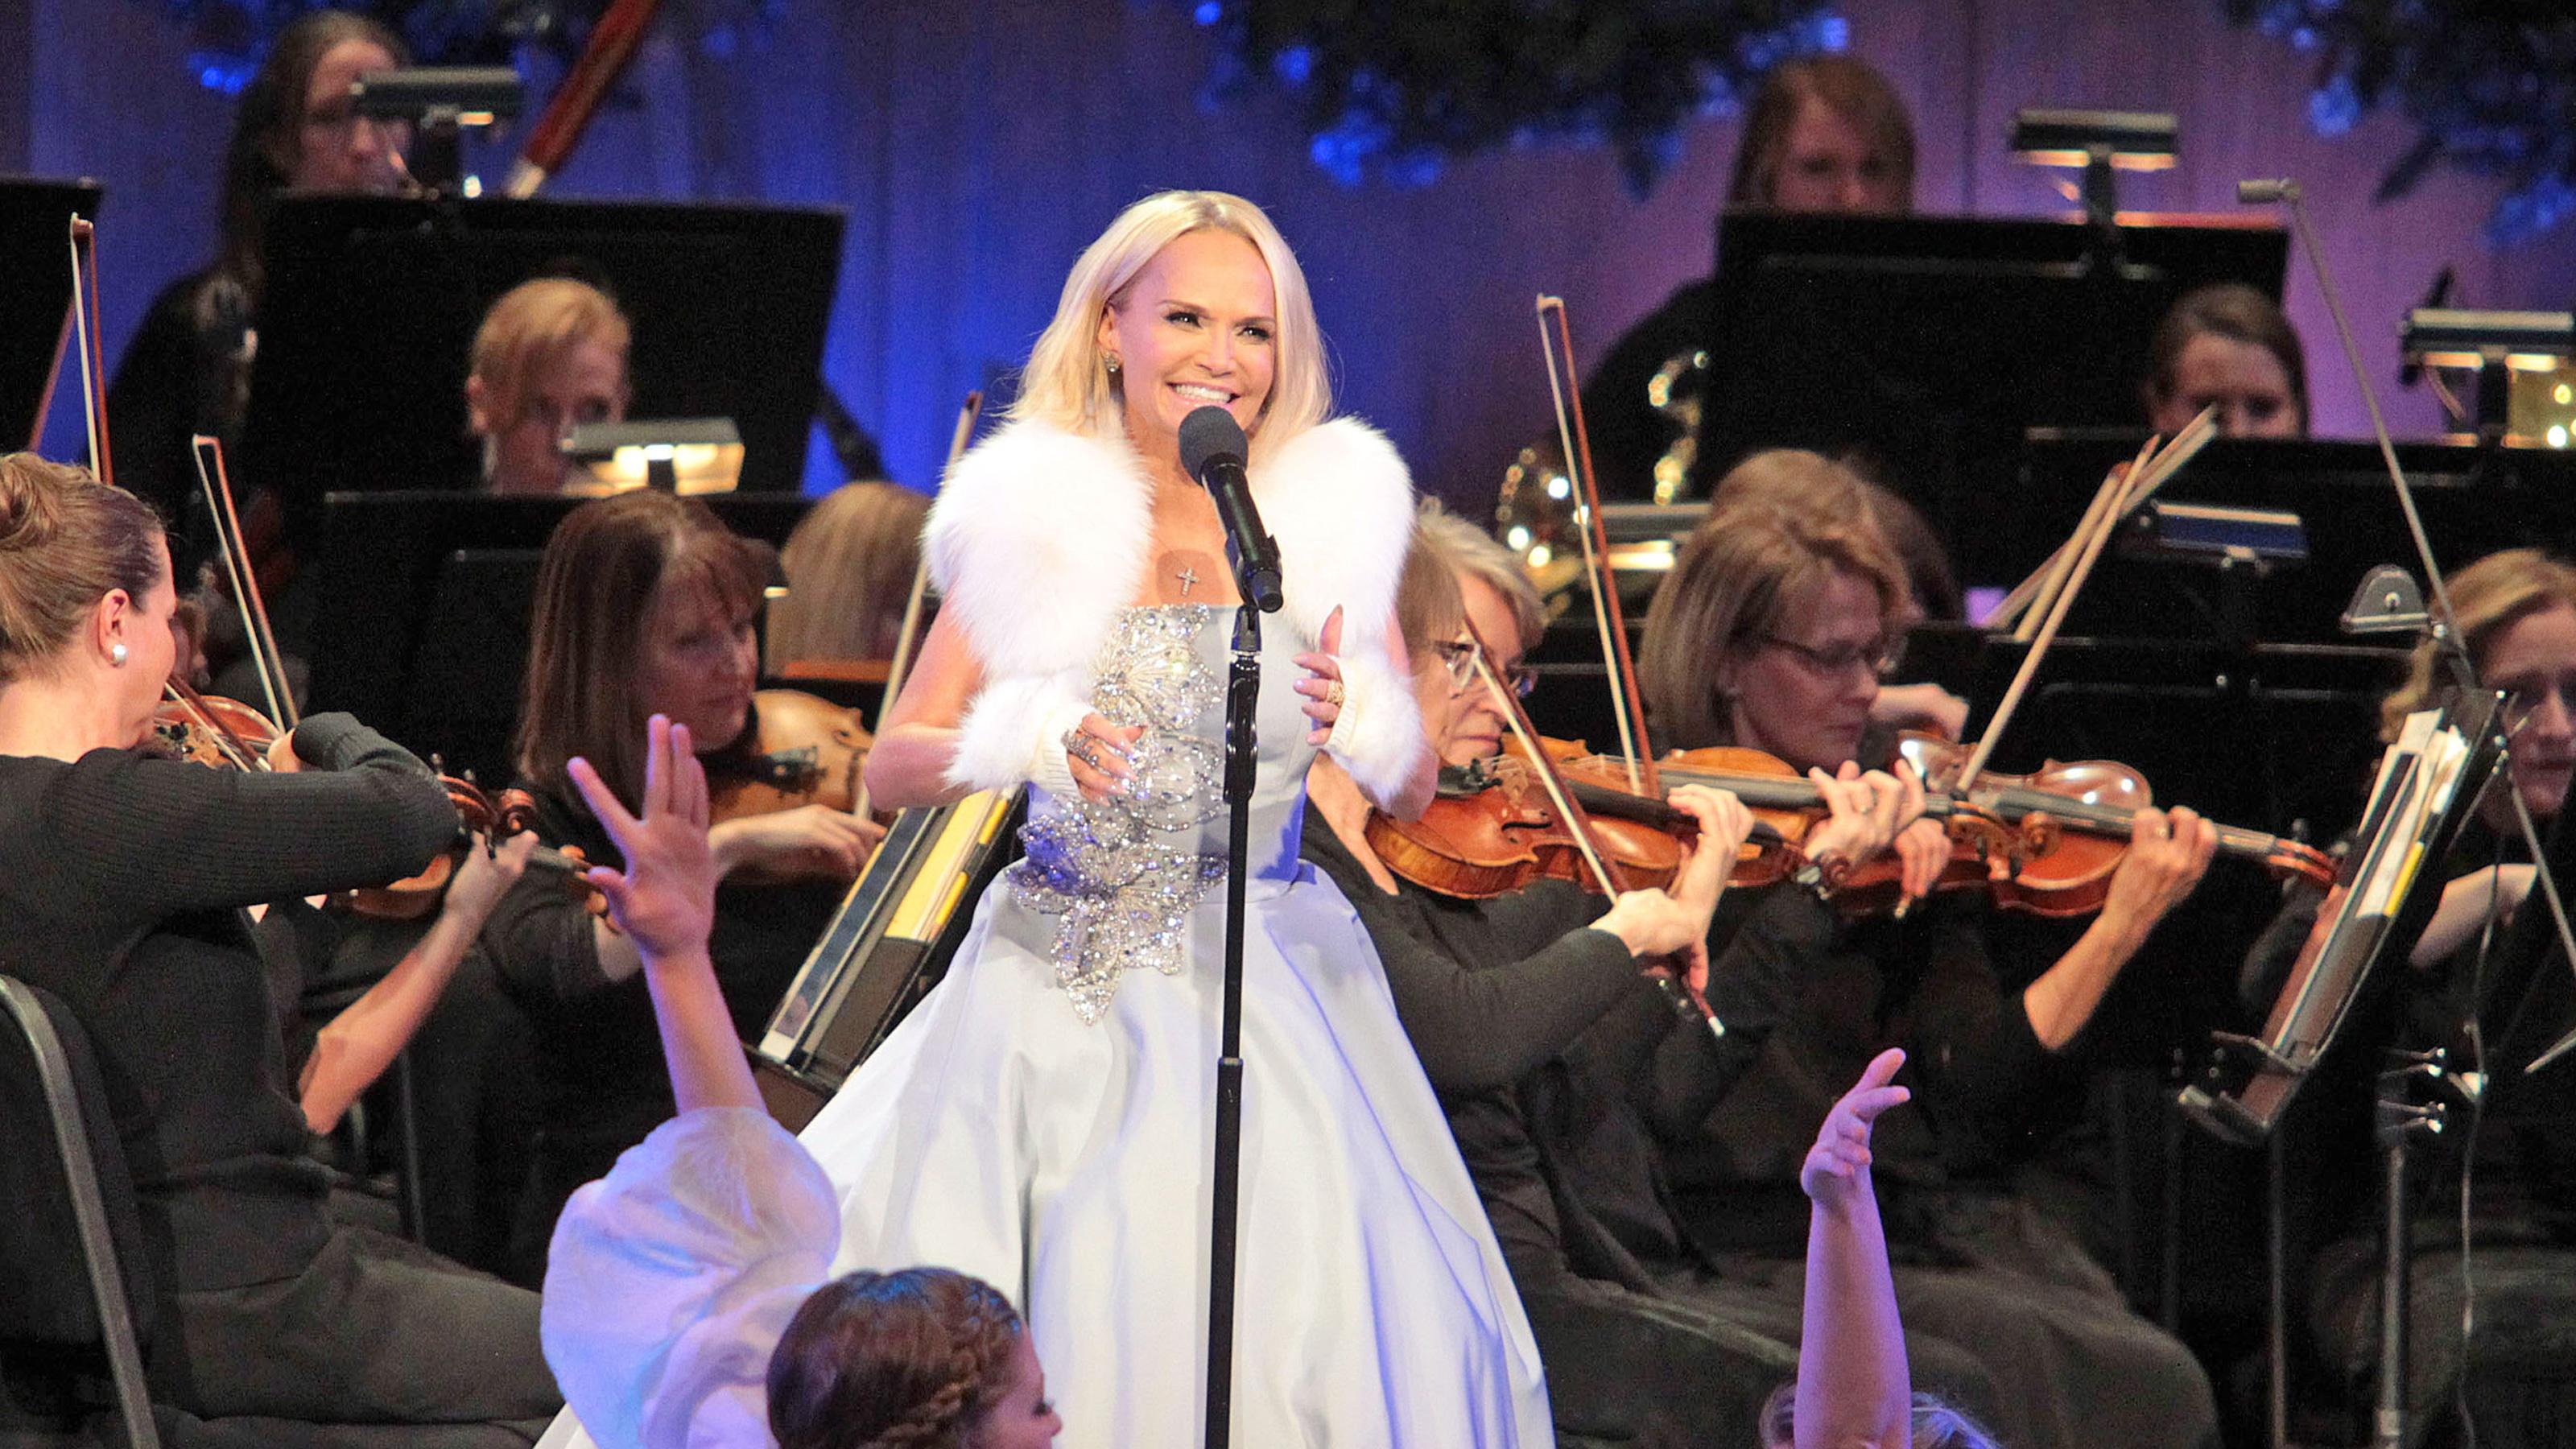 Kristin smiles on stage in front of a microphone with violinists playing behind her.